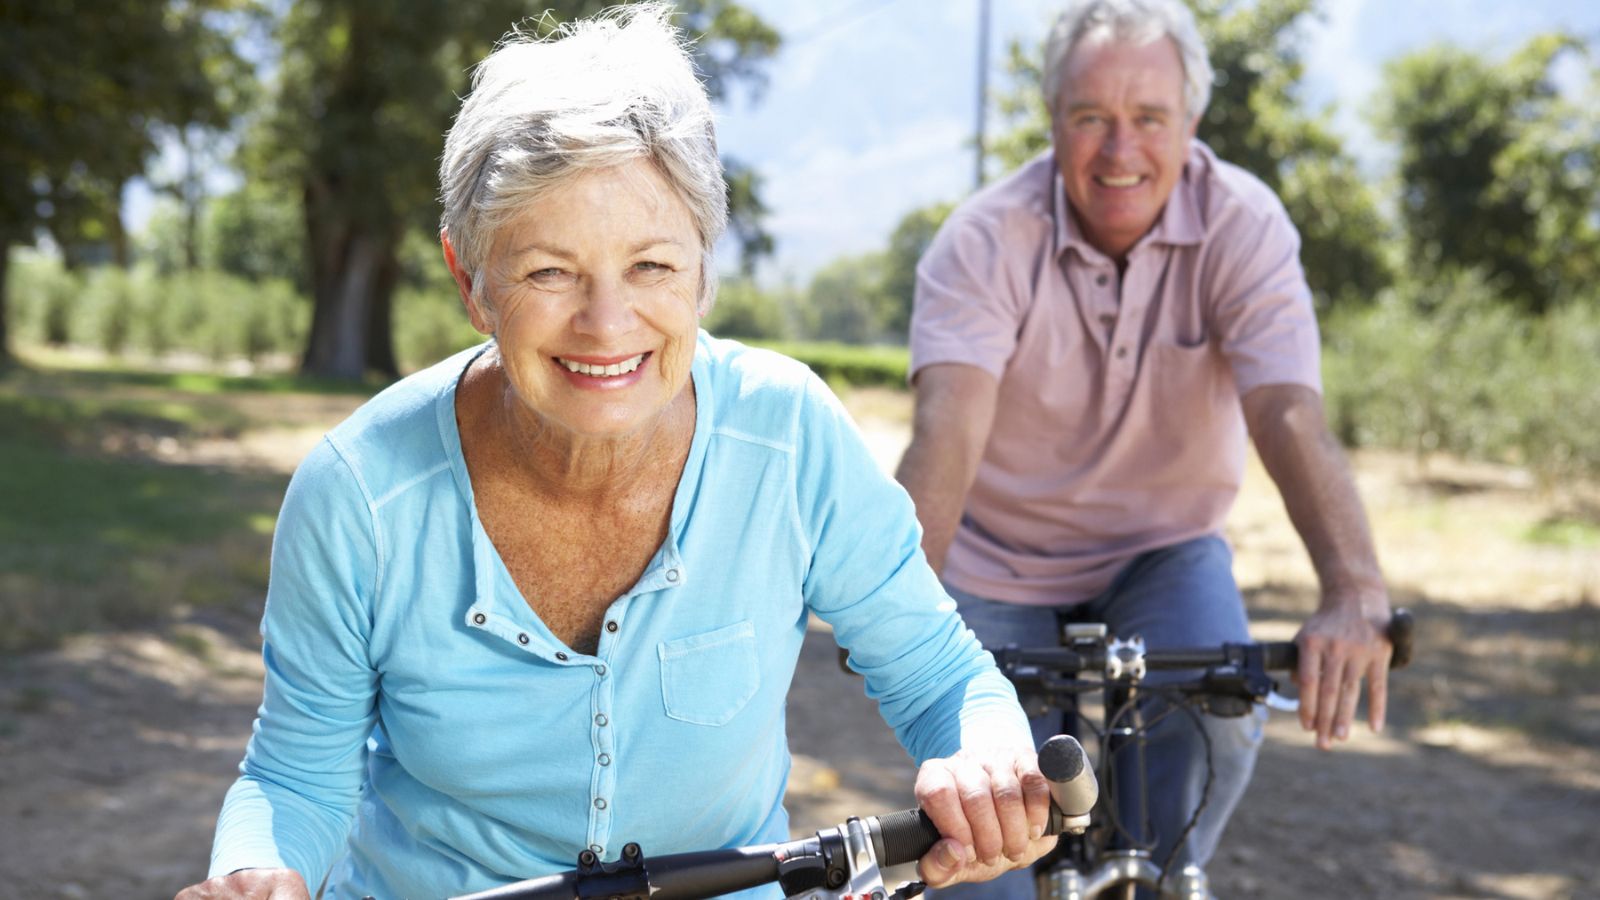 <p>Cycling, including the use of e-bikes, has become a favored activity for seniors seeking enjoyable, low-impact cardiovascular exercise. E-bikes, in particular, offer assistance on challenging terrains, making cycling accessible for those with varying fitness levels. This trend supports heart health, improves joint mobility, and offers an environmentally friendly way to explore and stay active.</p>